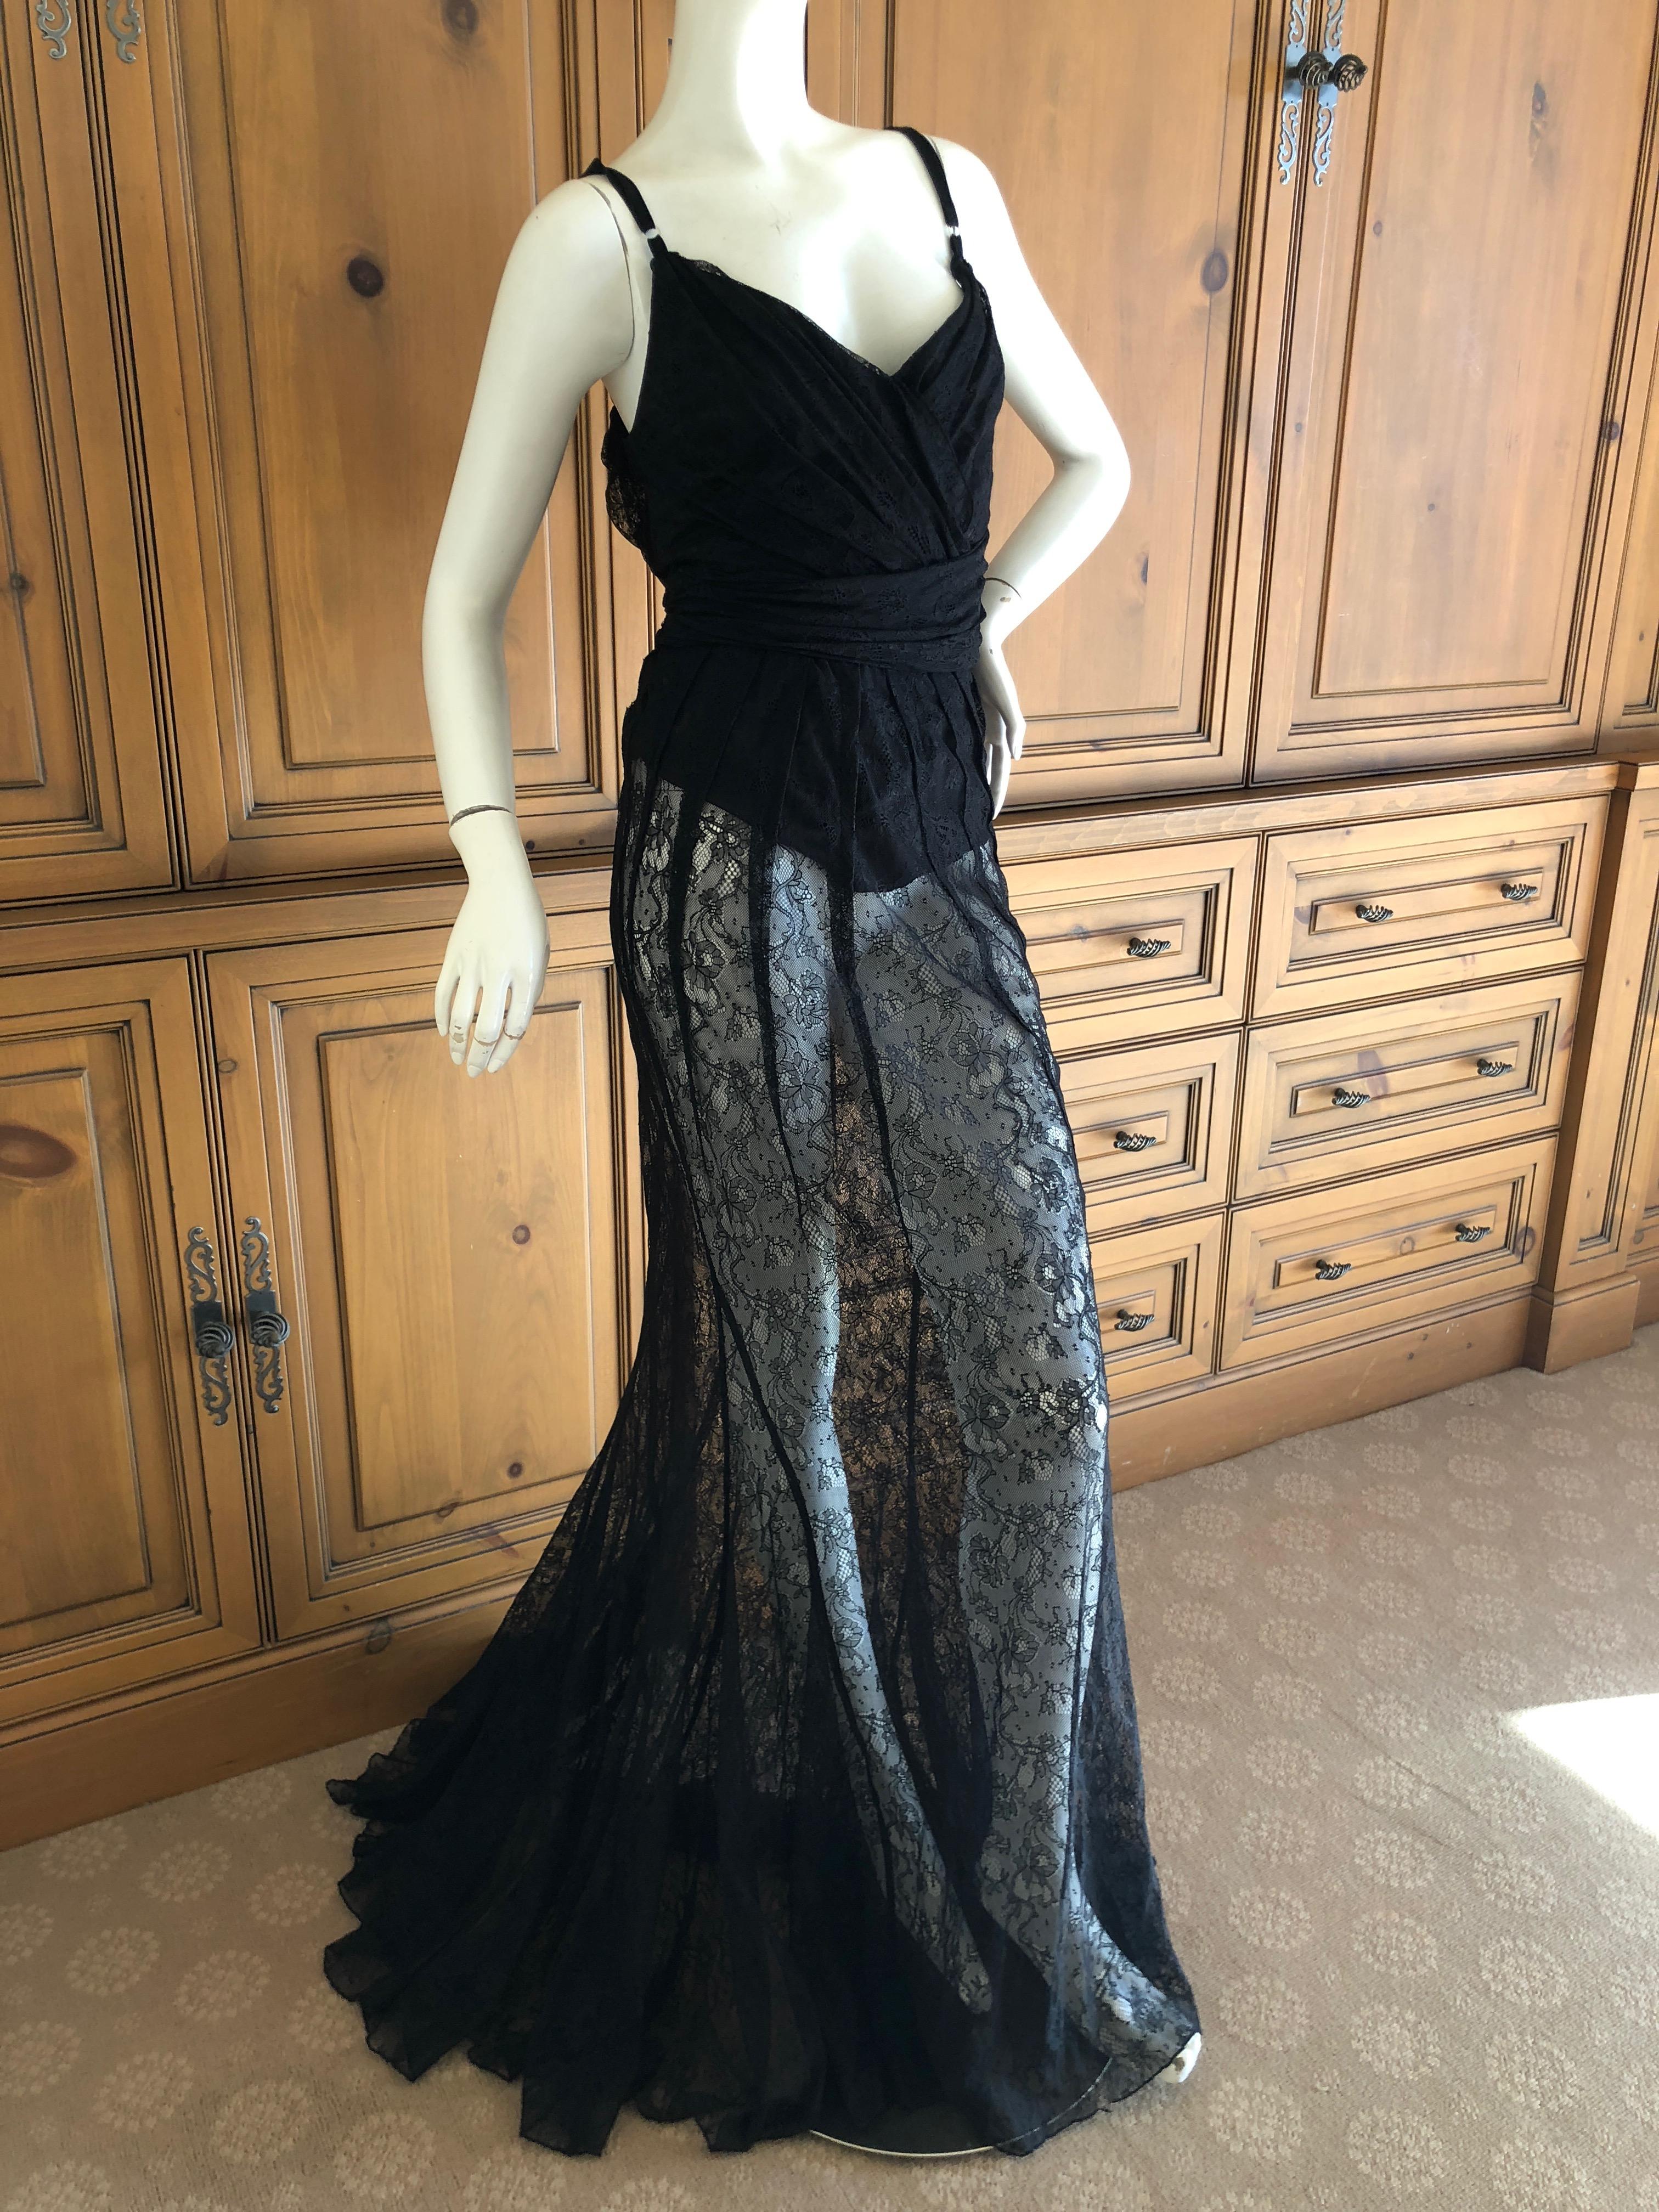 D&G Dolce & Gabbana Sheer Black Lace Vintage Evening Dress with Train In Excellent Condition For Sale In Cloverdale, CA